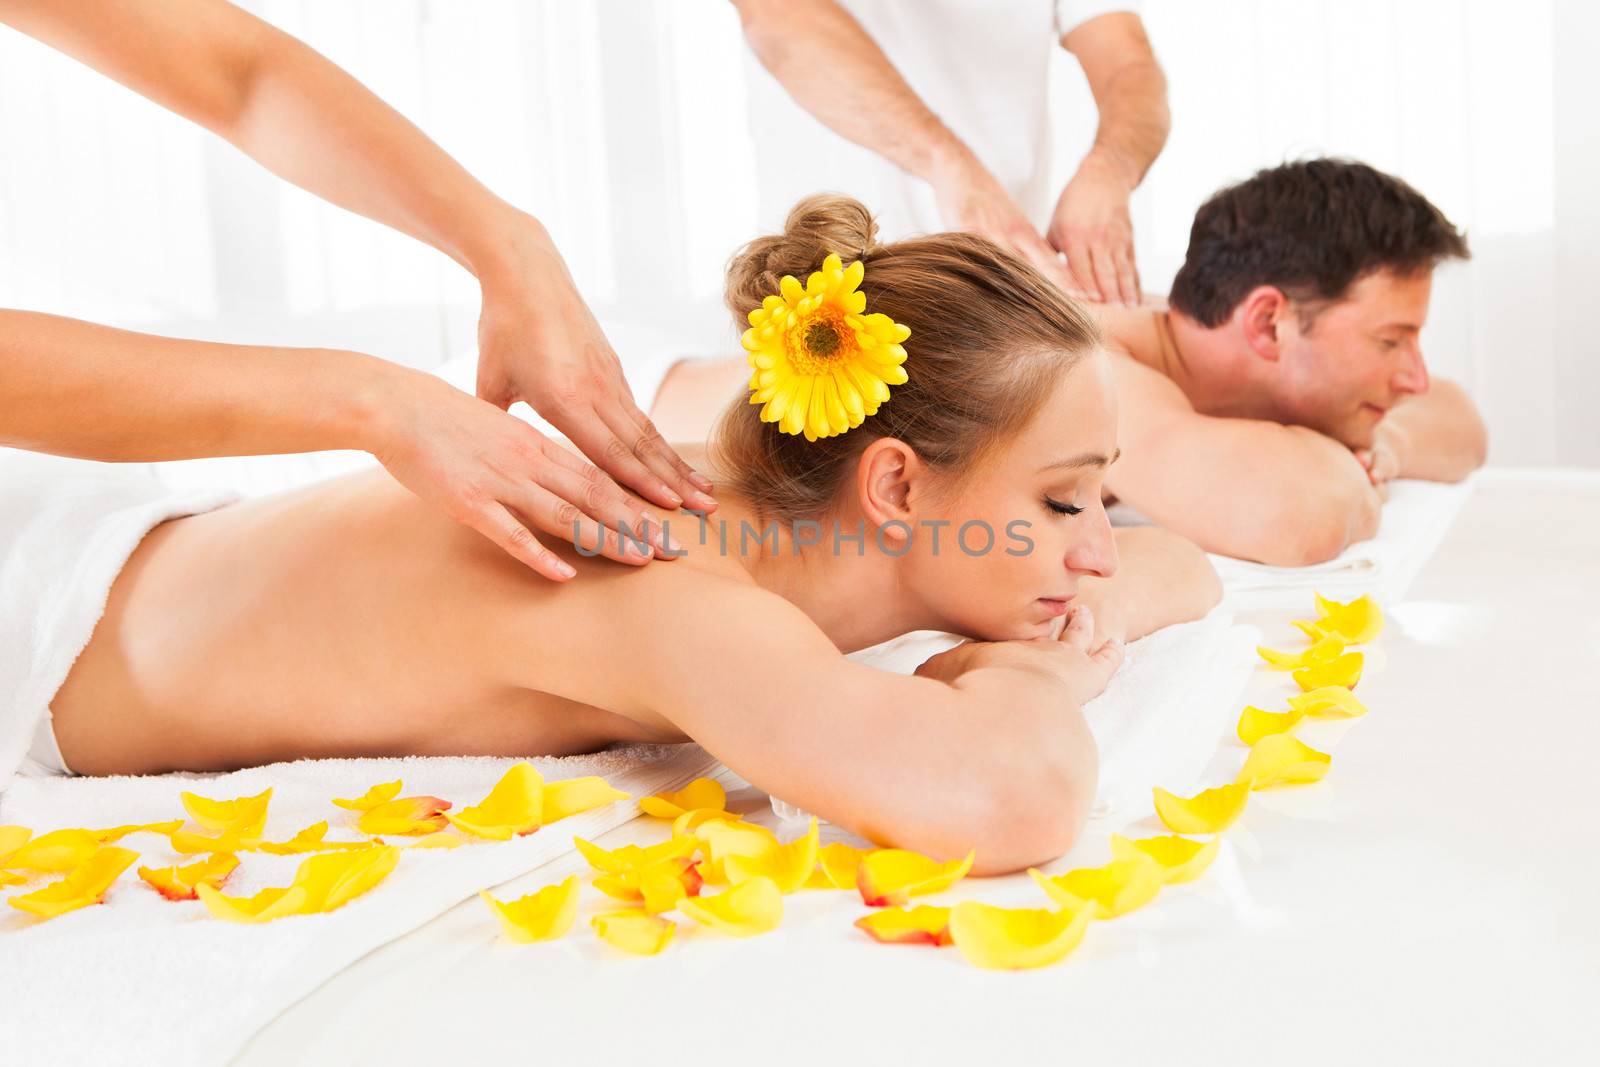 Attractive couple lying side by side in a spa enjoying the luxury of a deep tissue back massage together